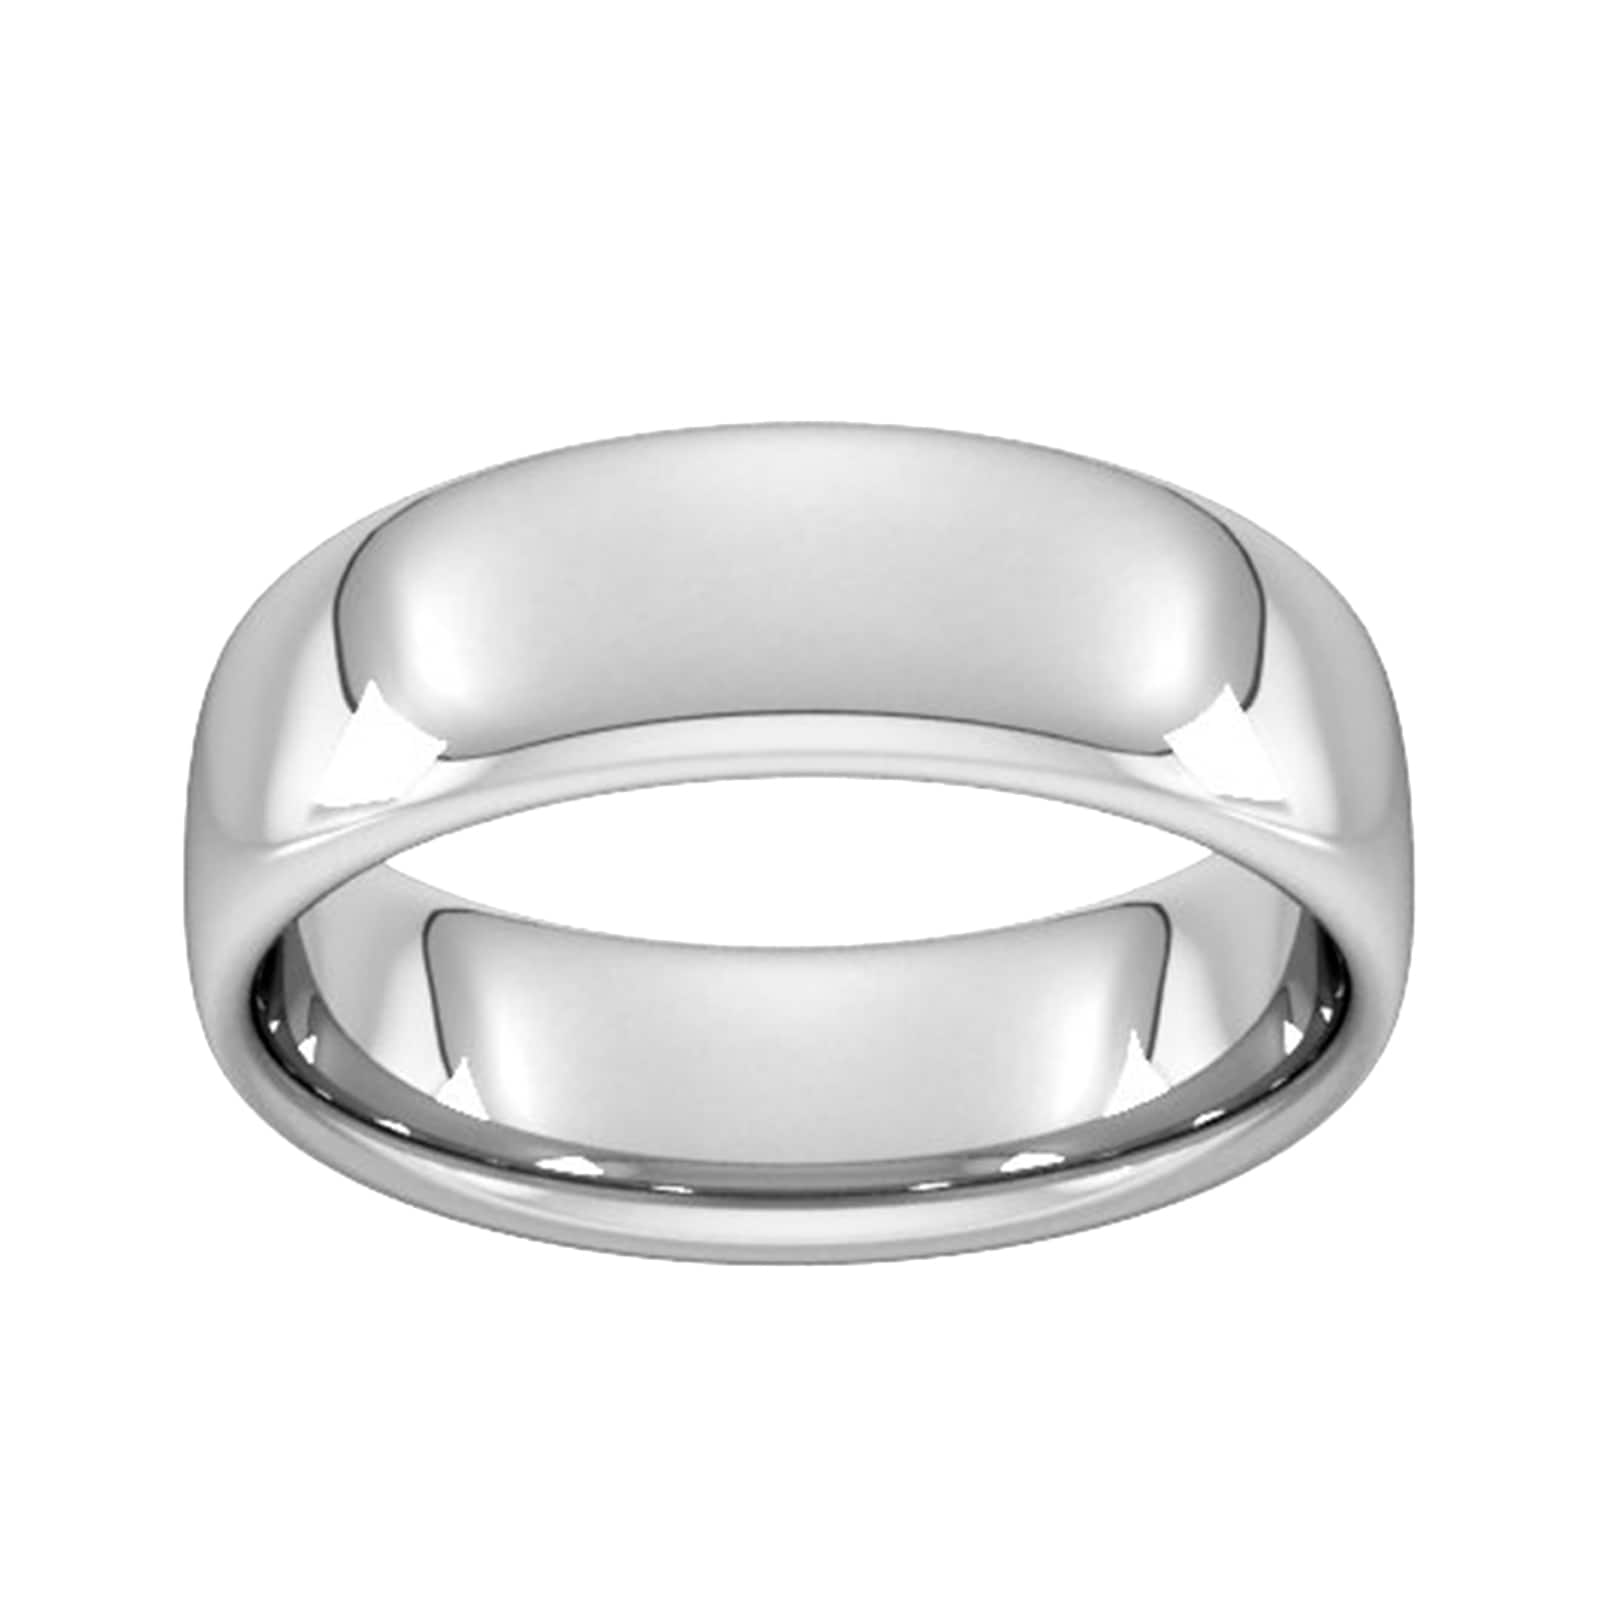 7mm Slight Court Heavy Wedding Ring In 9 Carat White Gold - Ring Size L